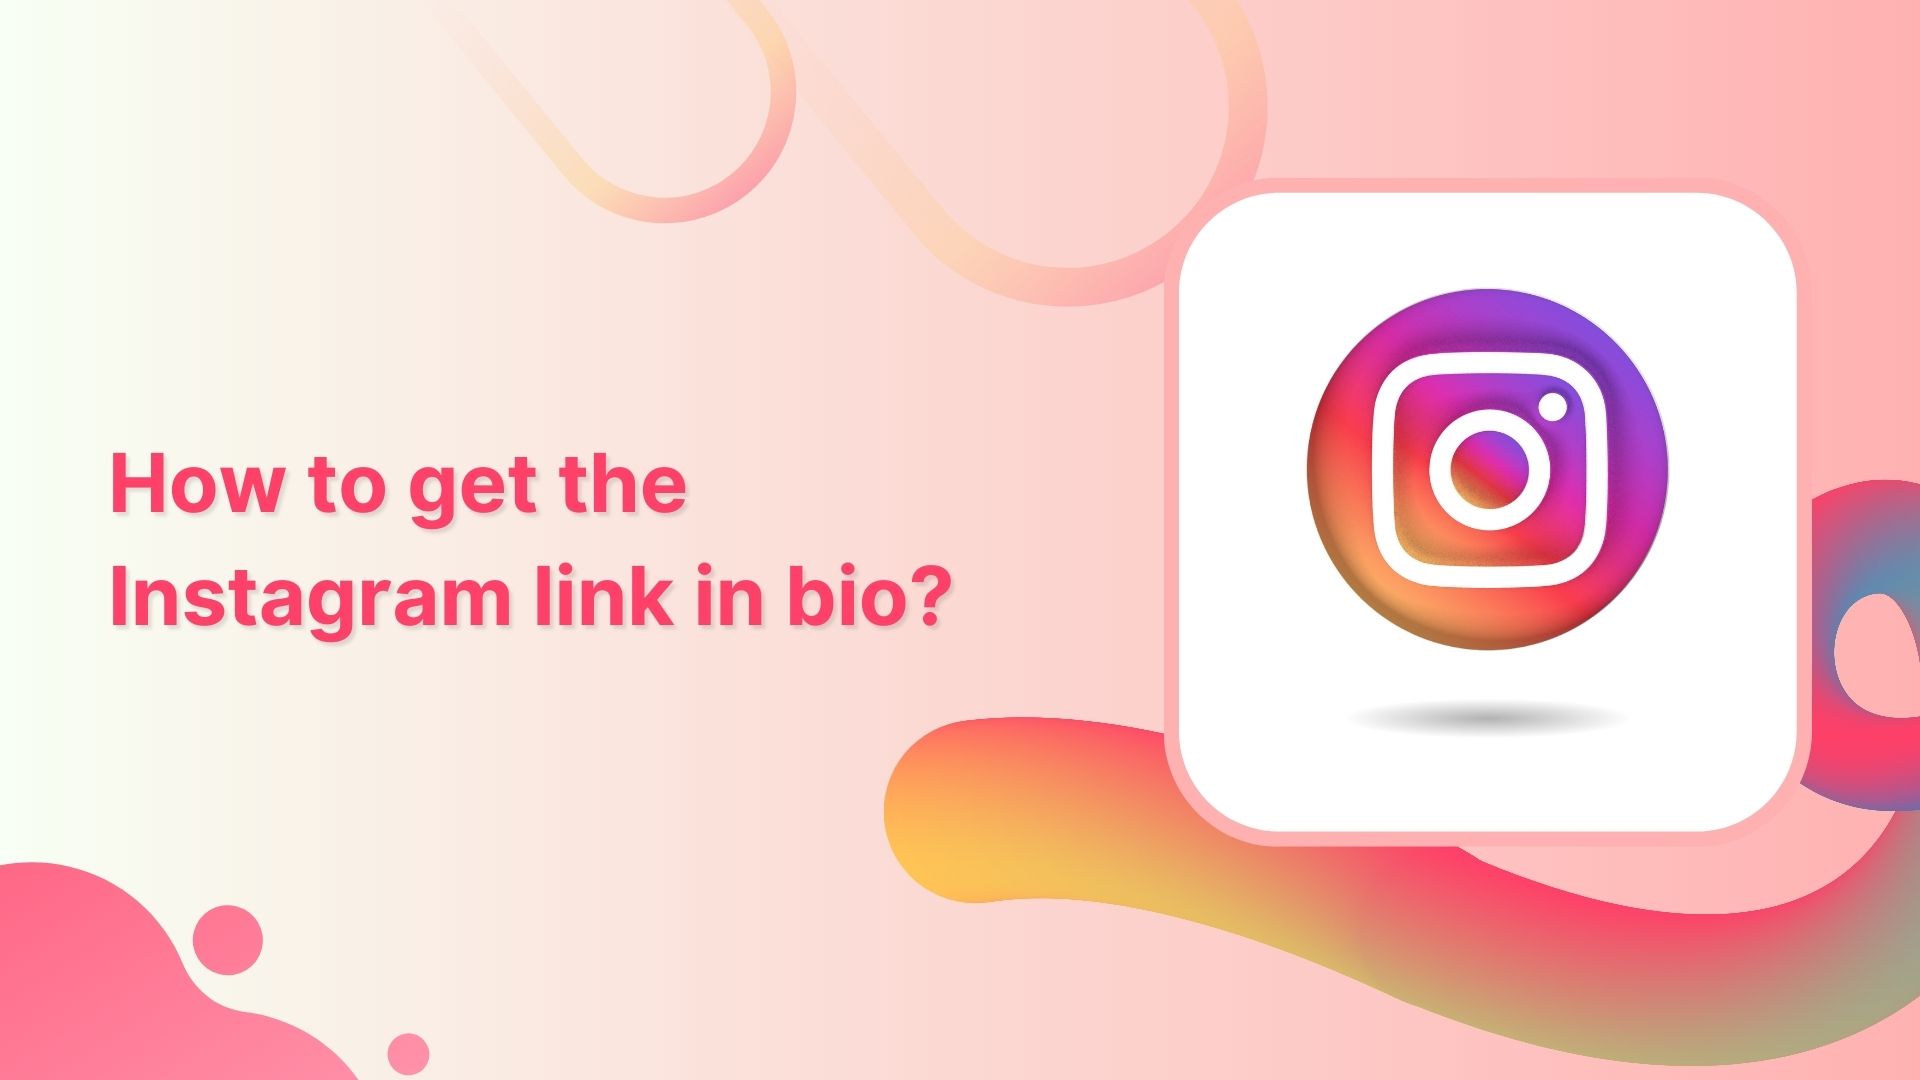 How to get to the link in the bio on Instagram?